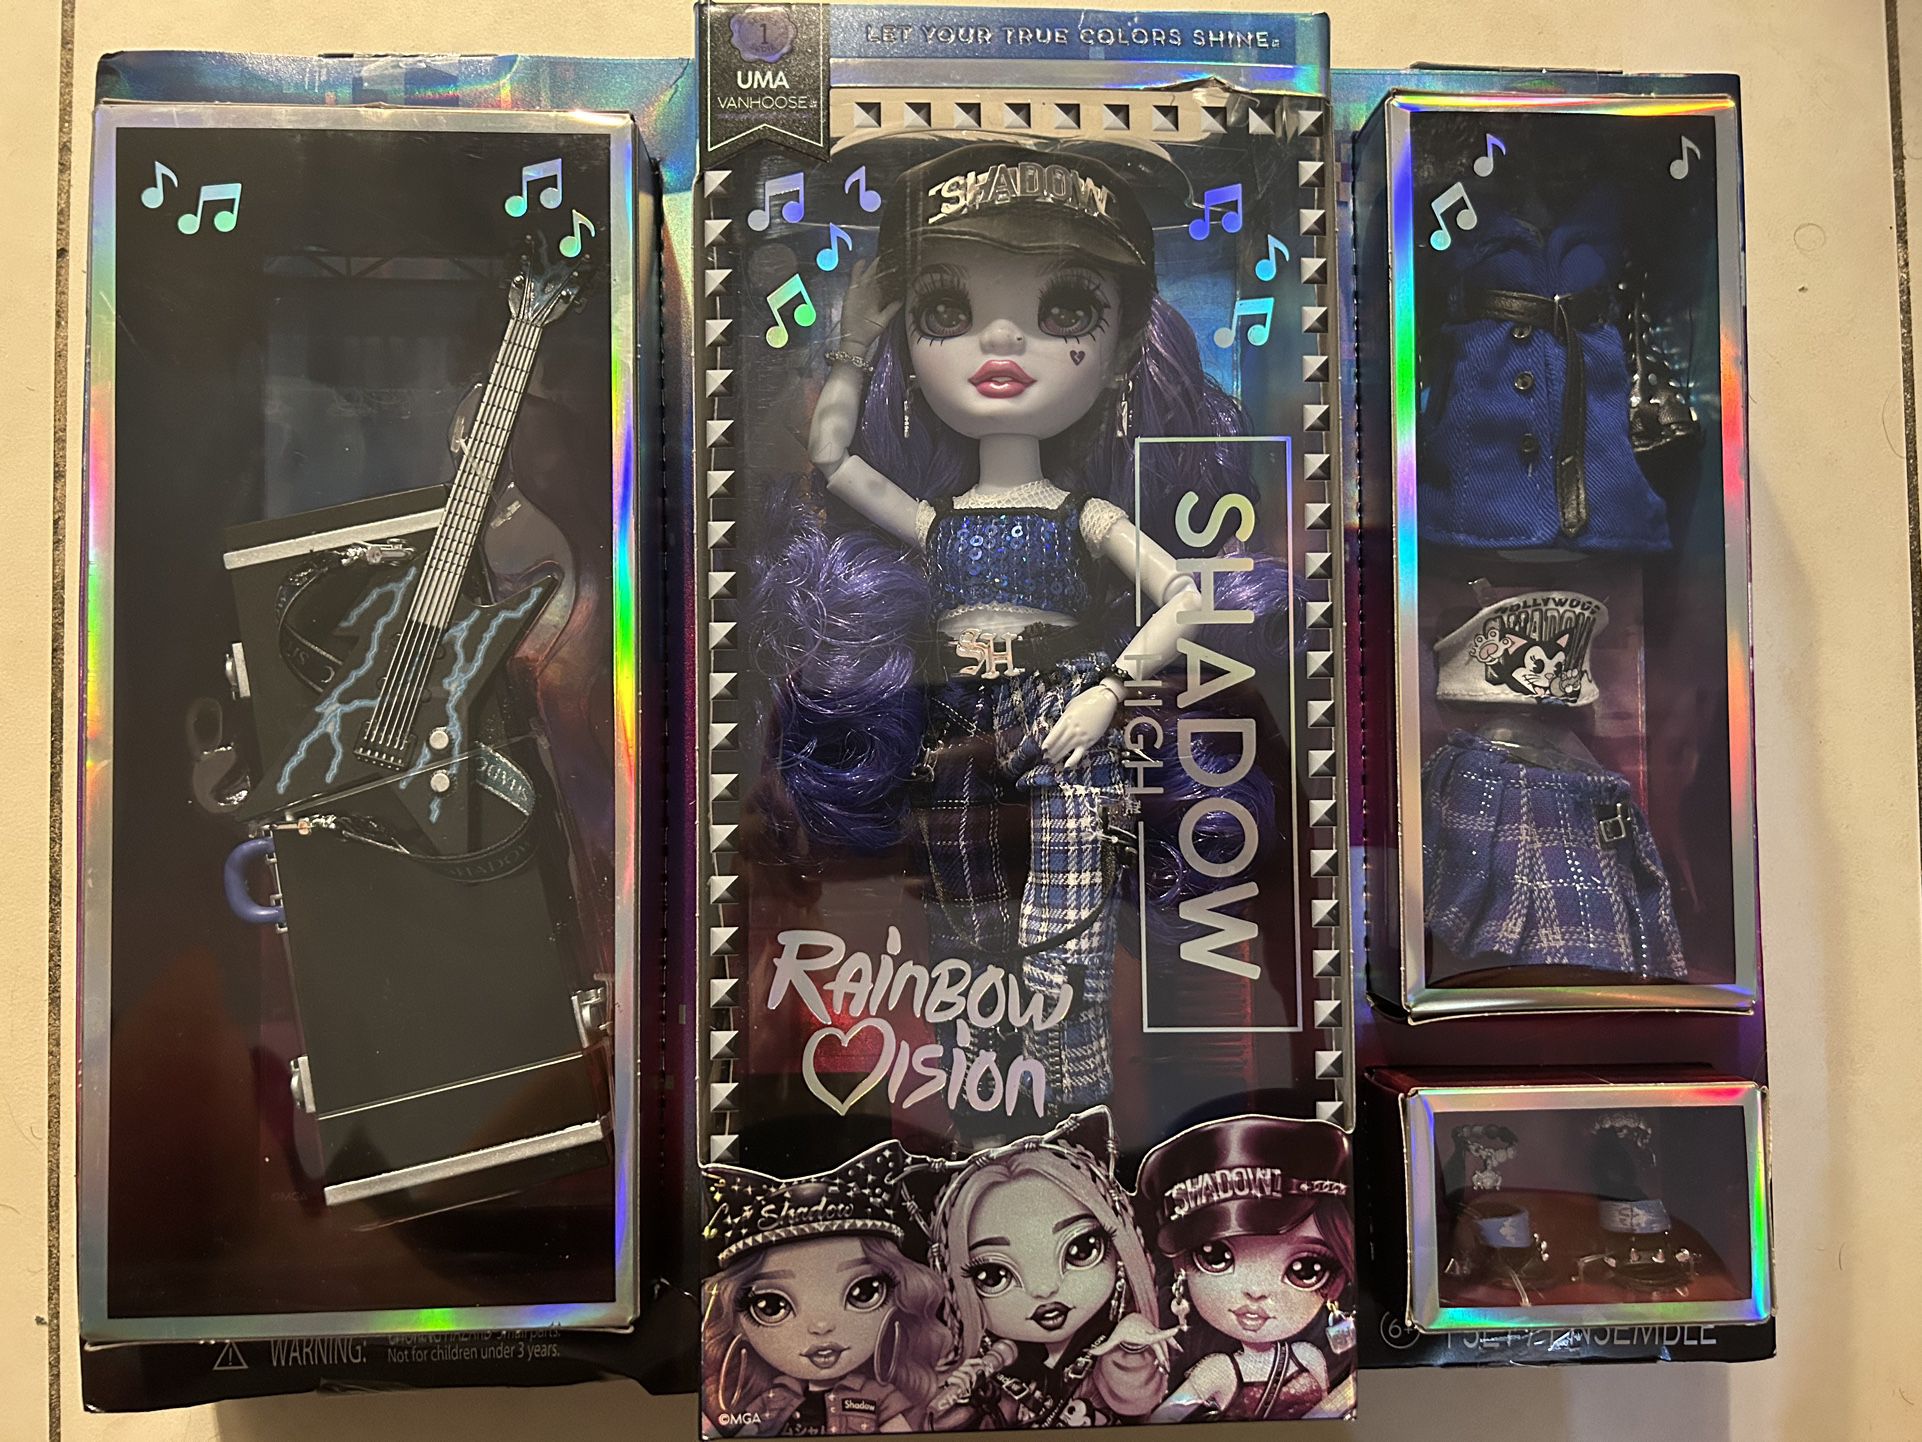 Rainbow High Vision and Neon Shadow-Uma Vanhoose (Neon Blue) Posable  Fashion Doll. 2 Designer Outfits to Mix & Match, Rock Band Accessories  Playset